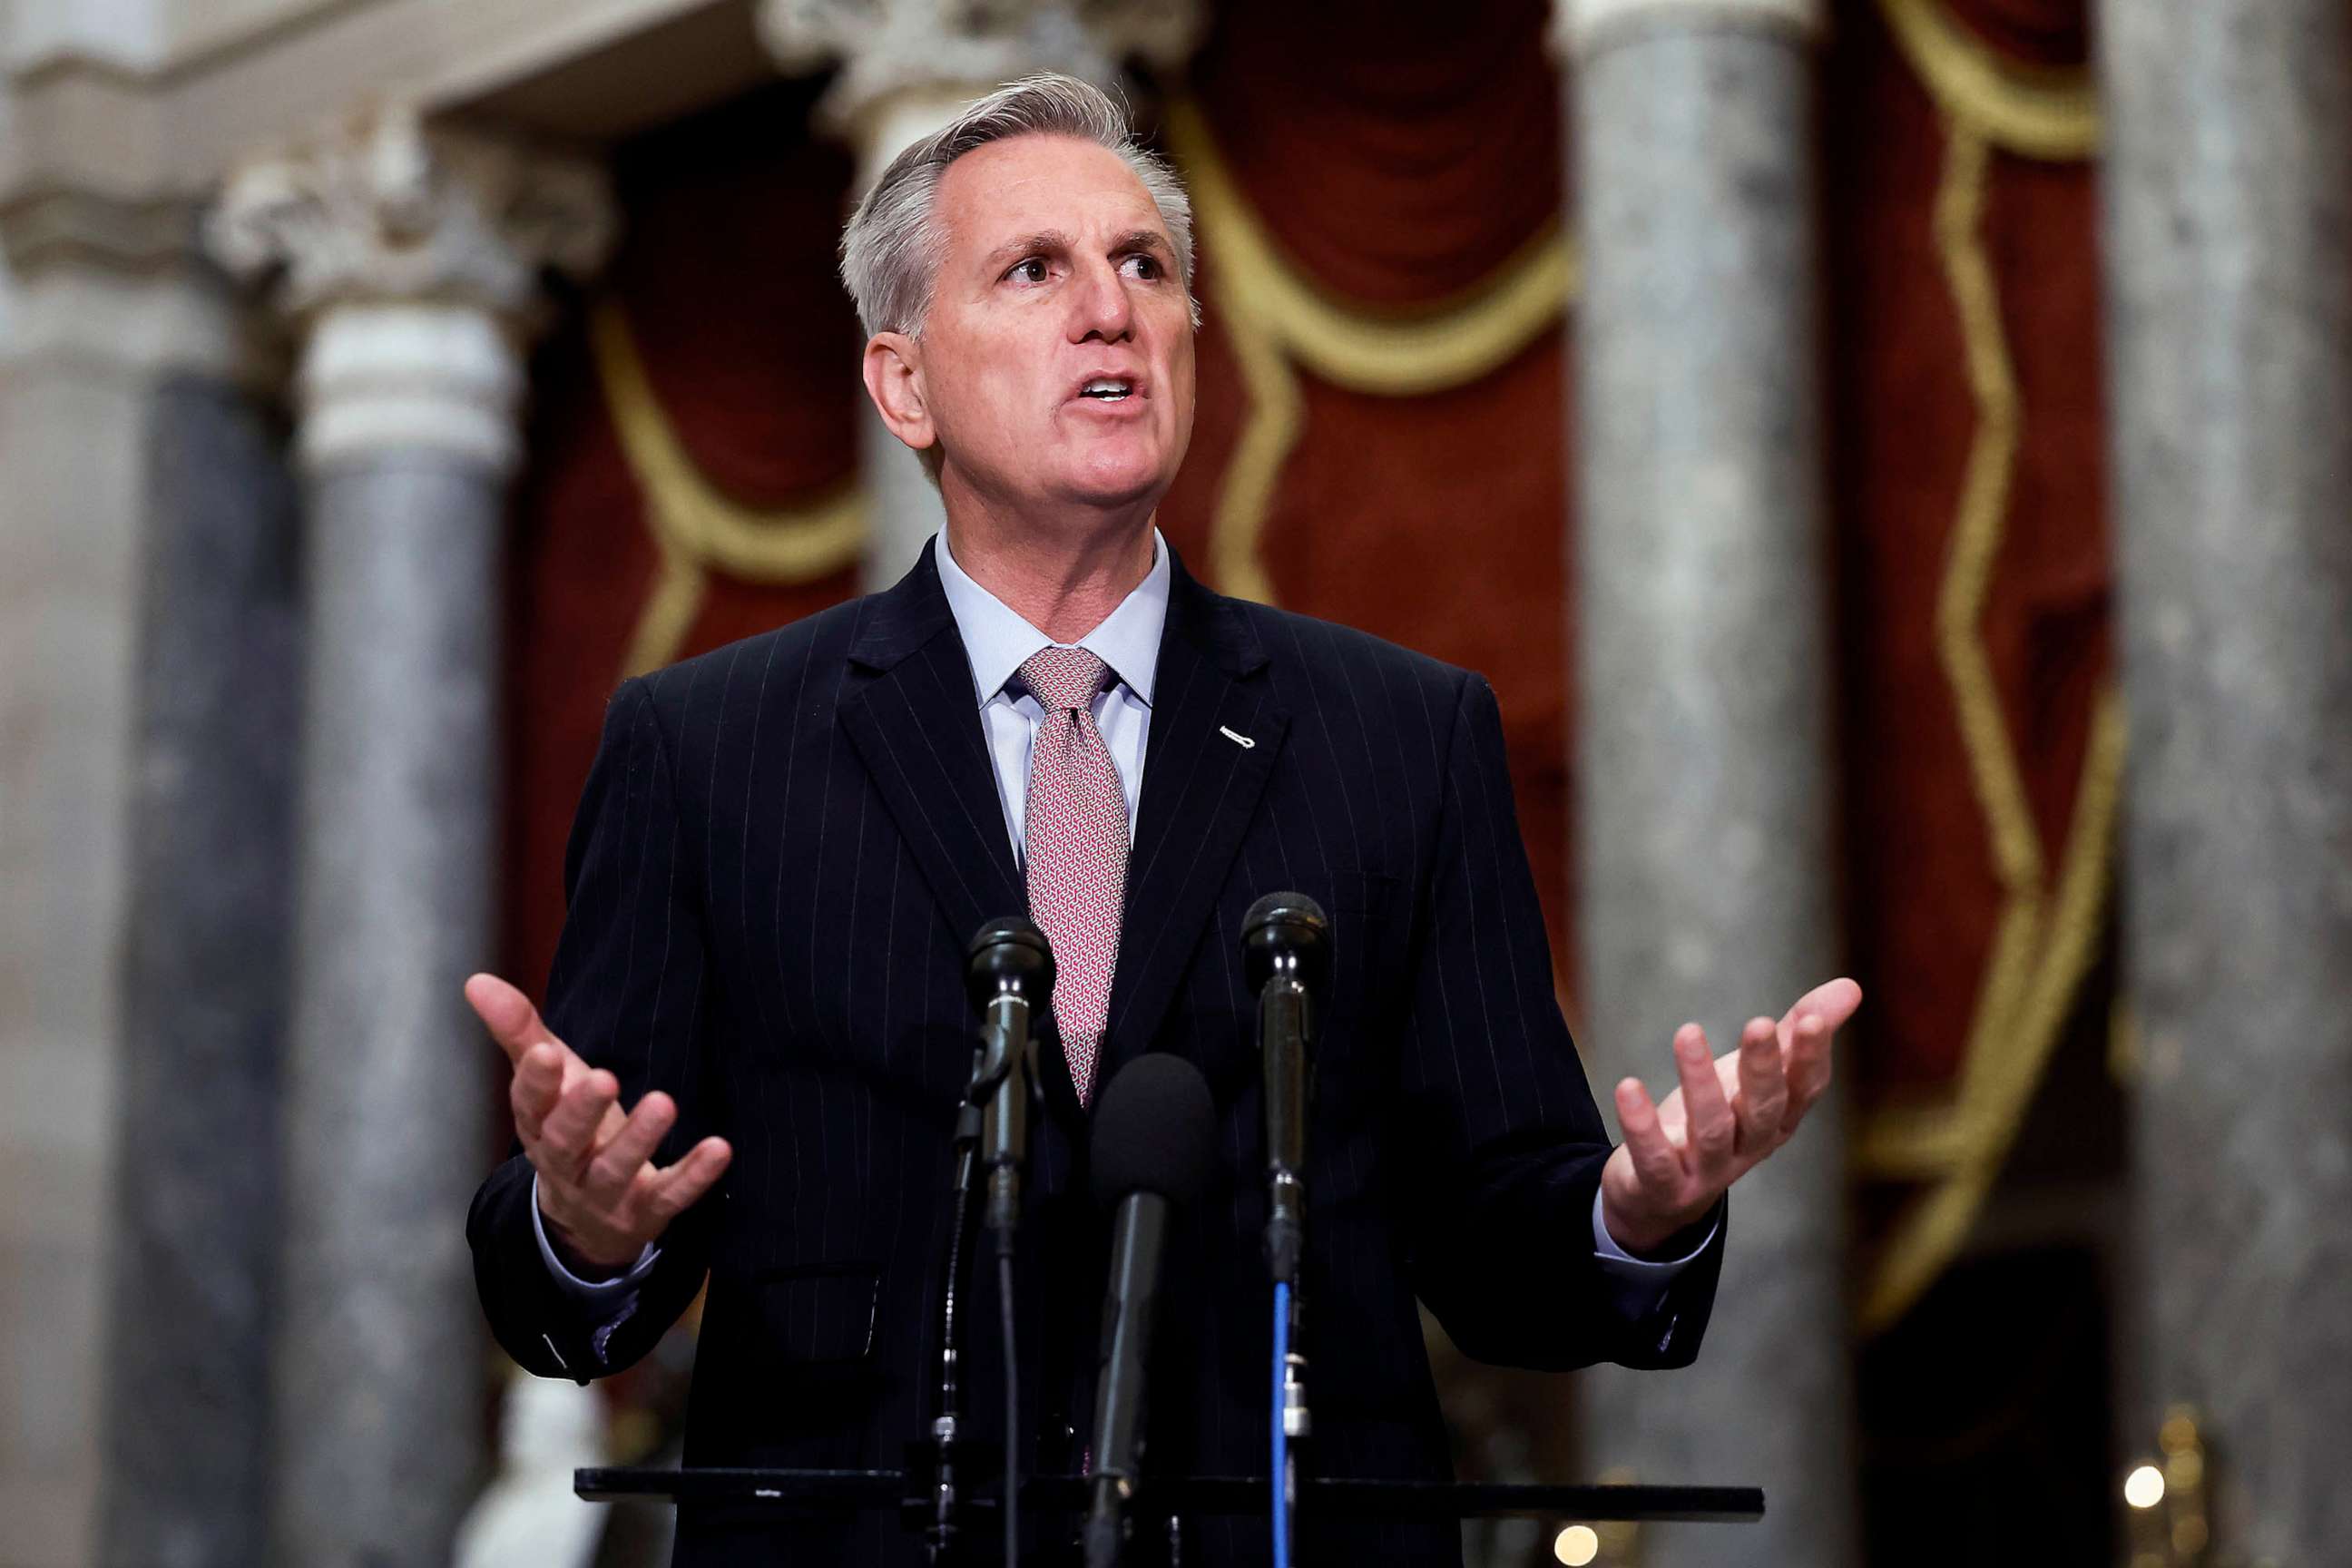 PHOTO: U.S. Speaker Kevin McCarthy speaks at a news conference in Statuary Hall of the U.S. Capitol Building, Jan. 12, 2023 in Washington, DC.